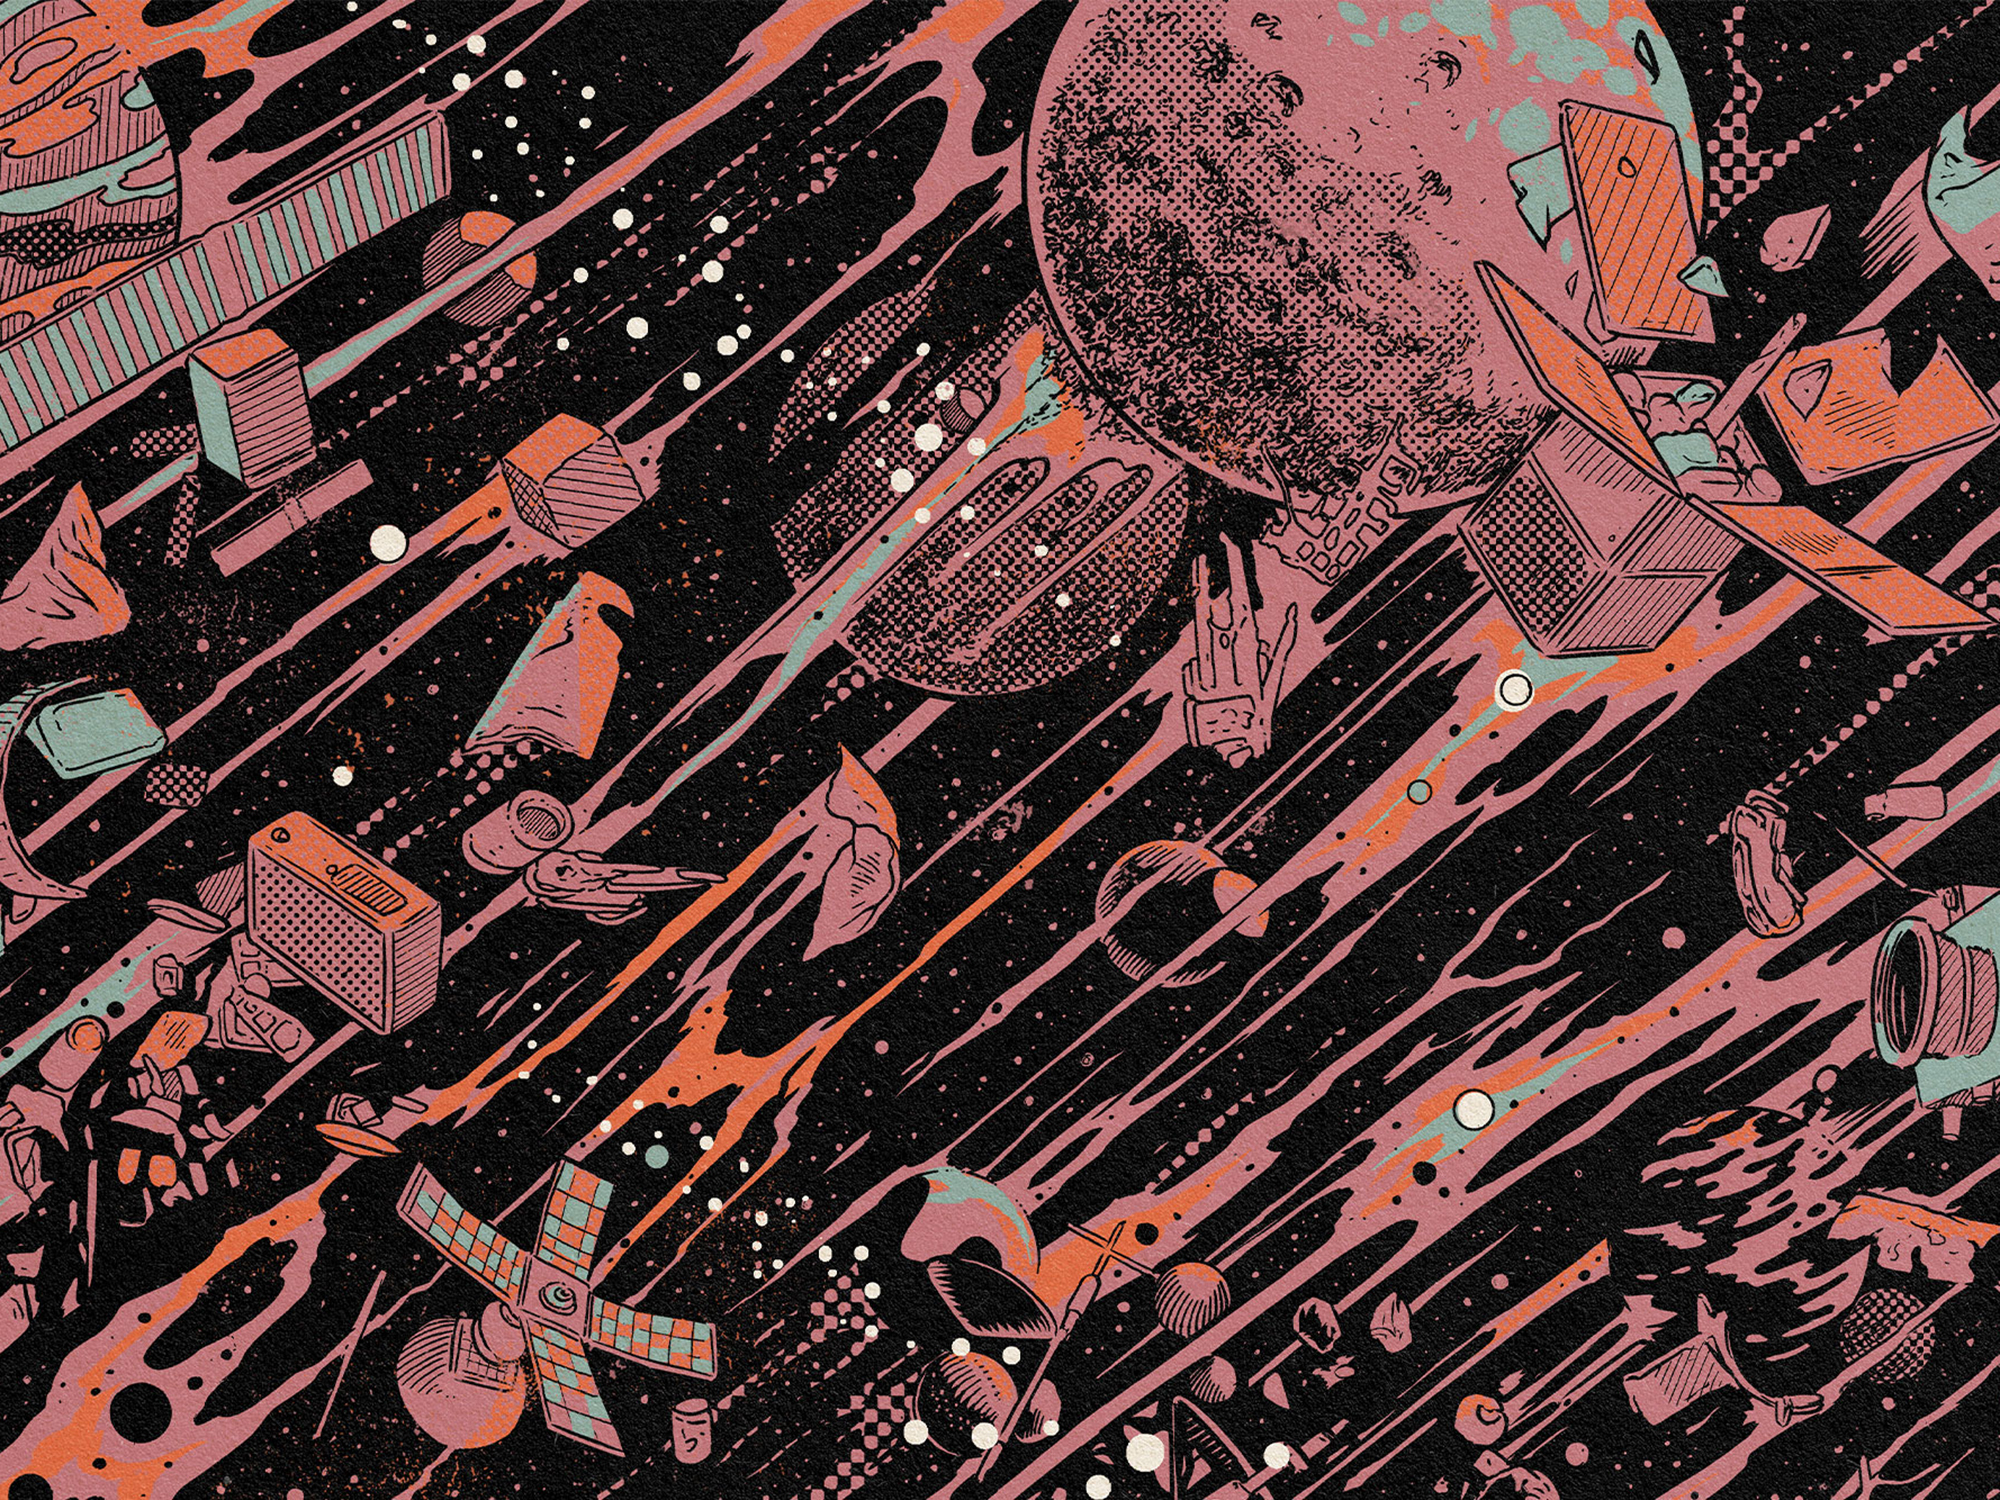 Garbage in space illustrated in blacks and reds